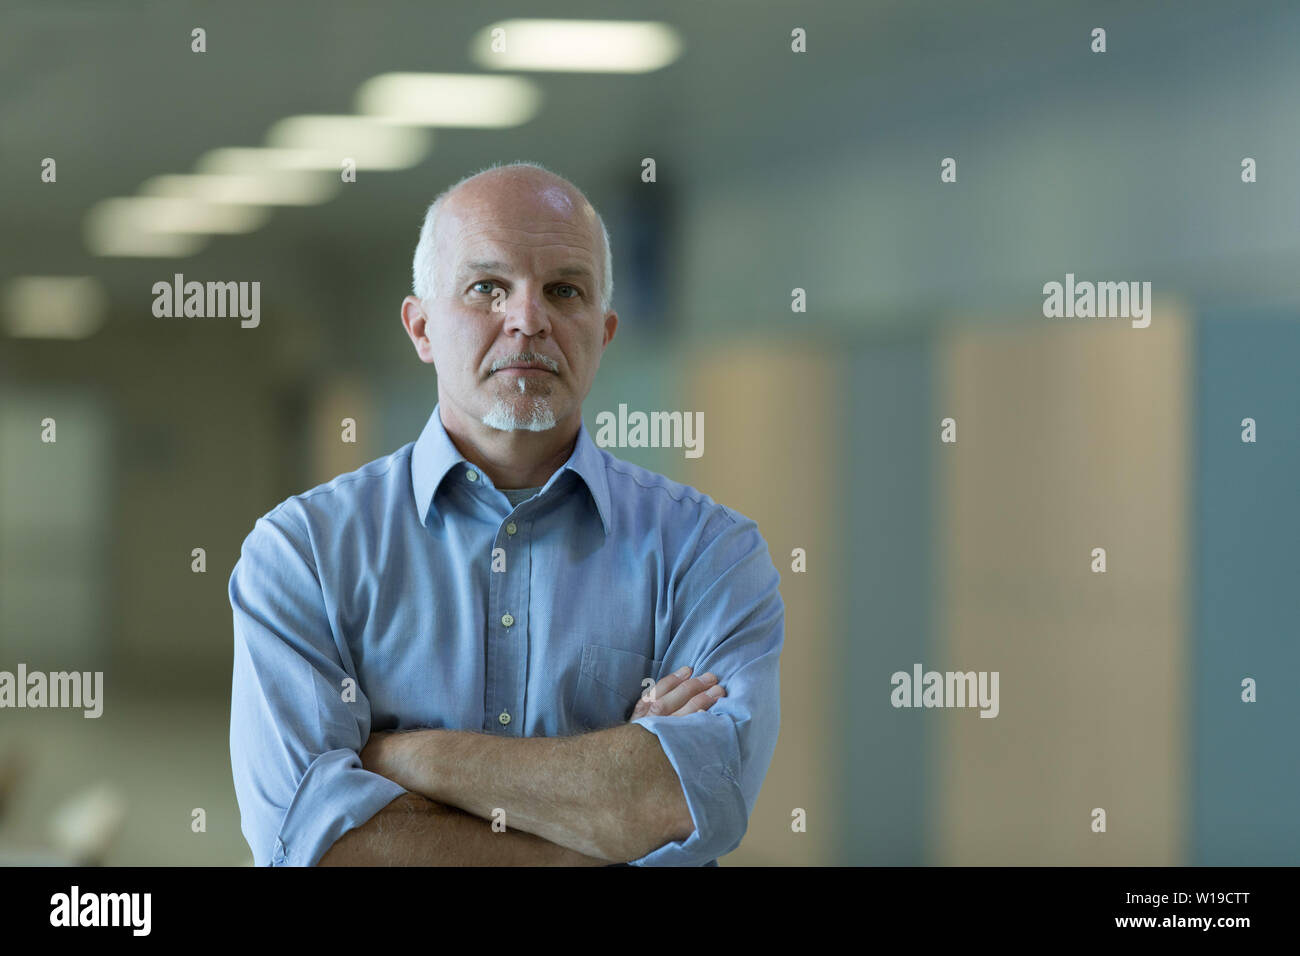 Half body portrait of senior businessman with folded arms and thoughtful expression. Stock Photo